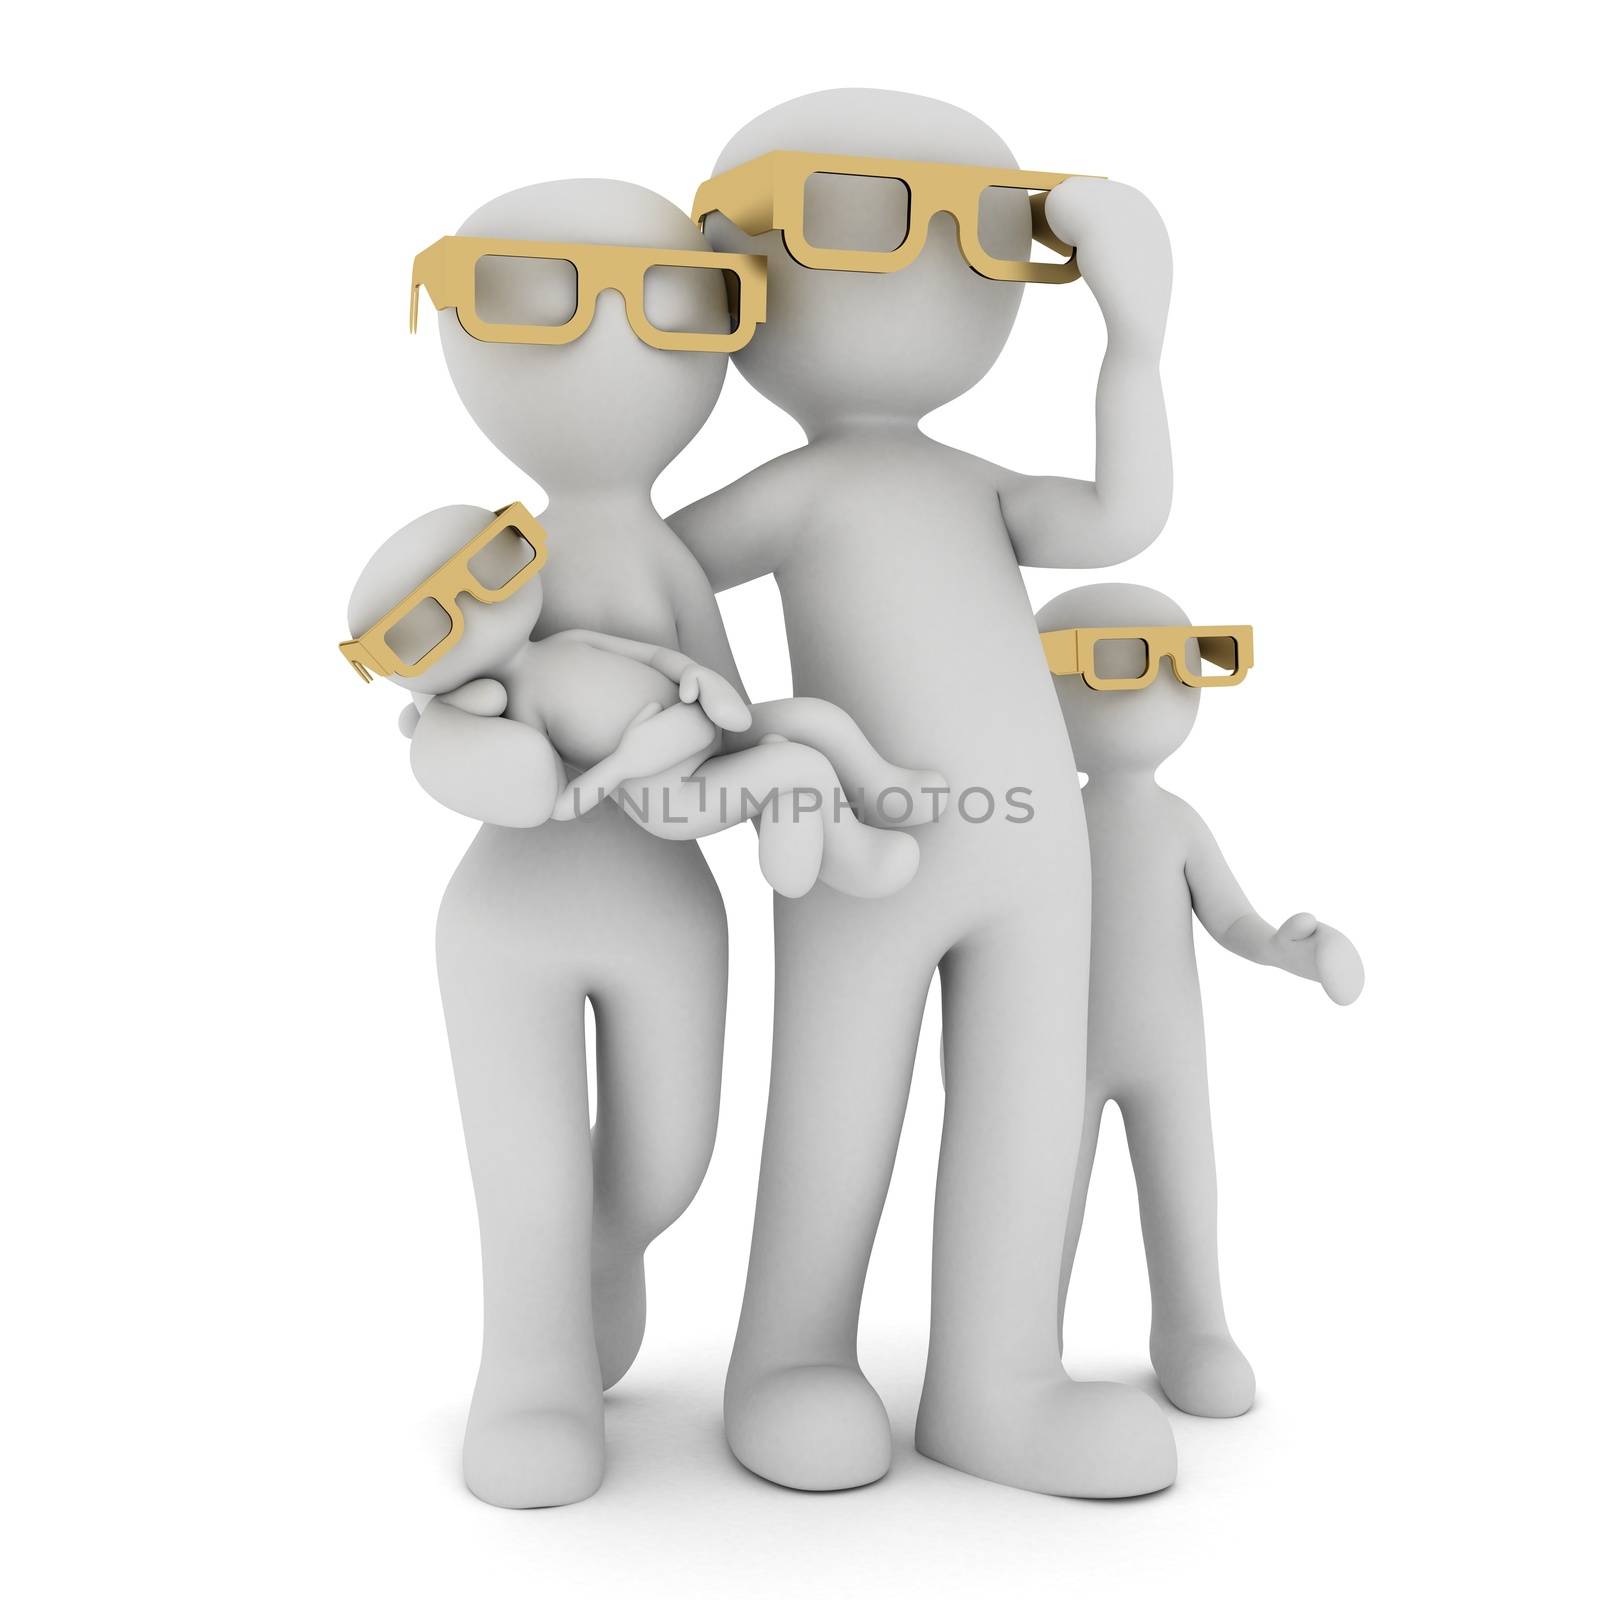 A family in which all have a glasses.